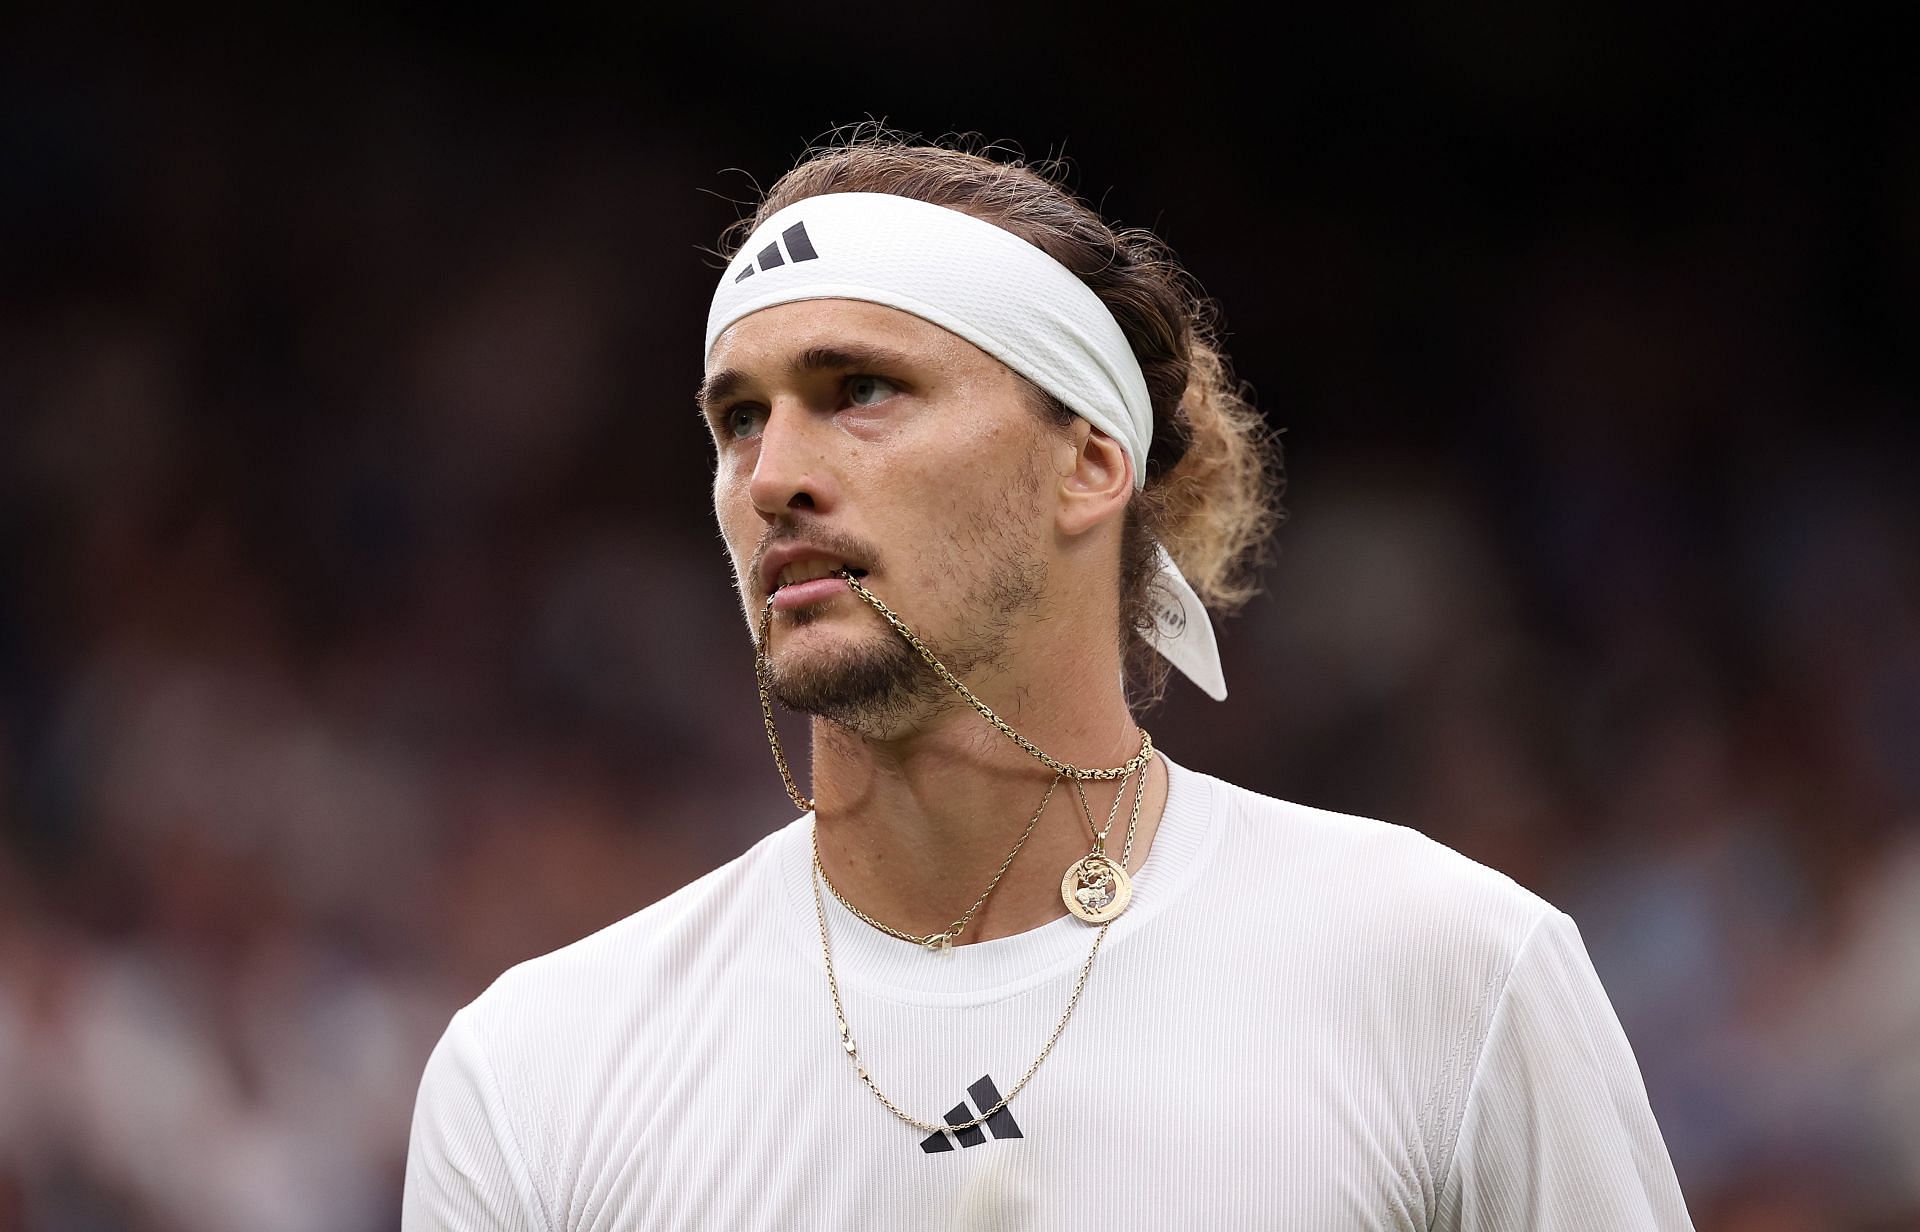 Alexander Zverev's diminishing Grand Slam chances: Does the German's concerning record in five-setters paint a worrying picture after Wimbledon exit?